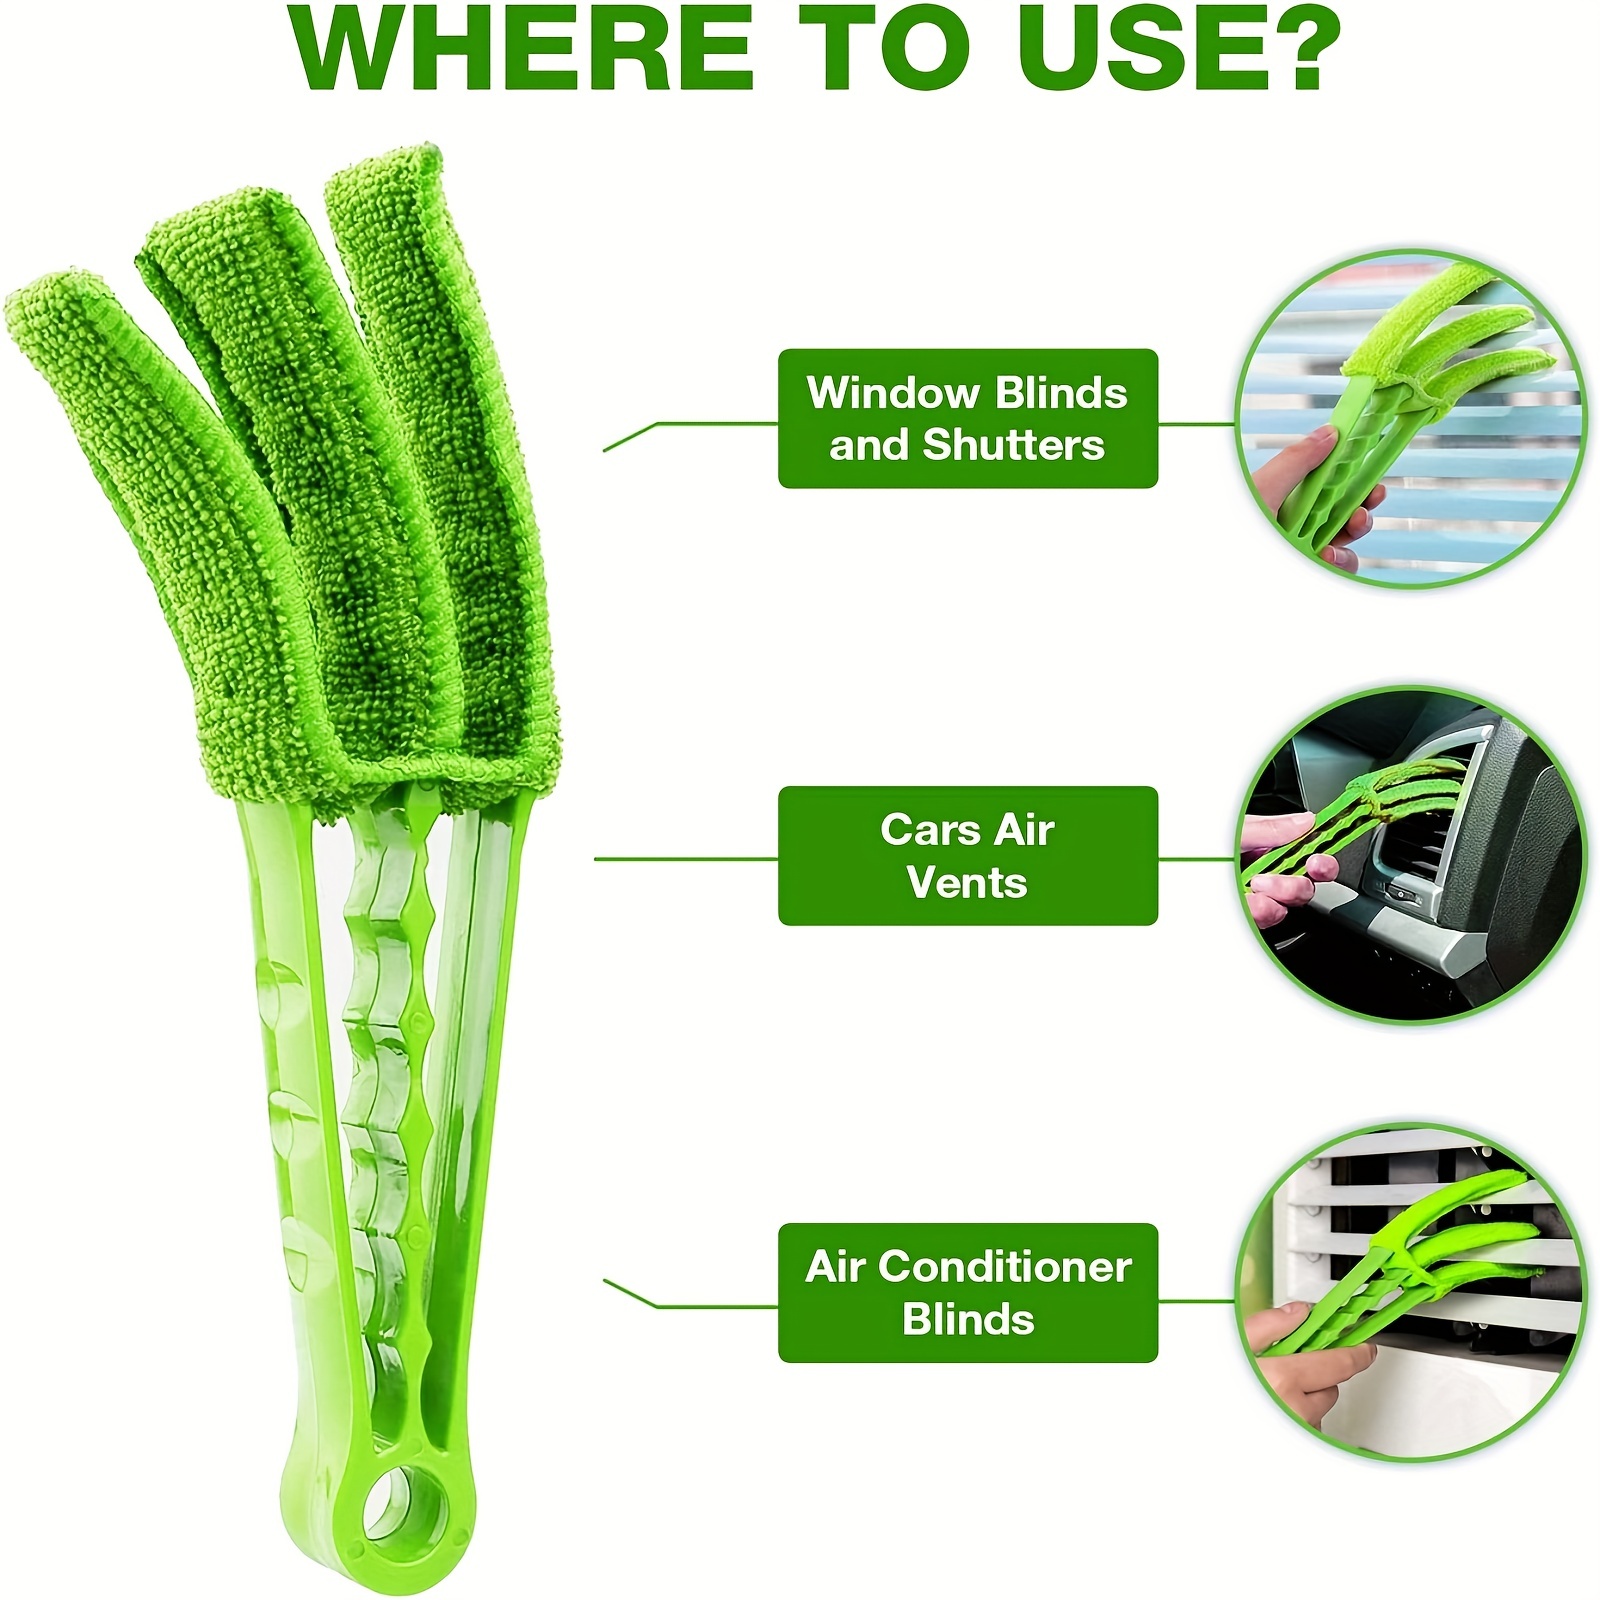 Blind Cleaning Brush Air Conditioning Outlet Cleaning Brush Window